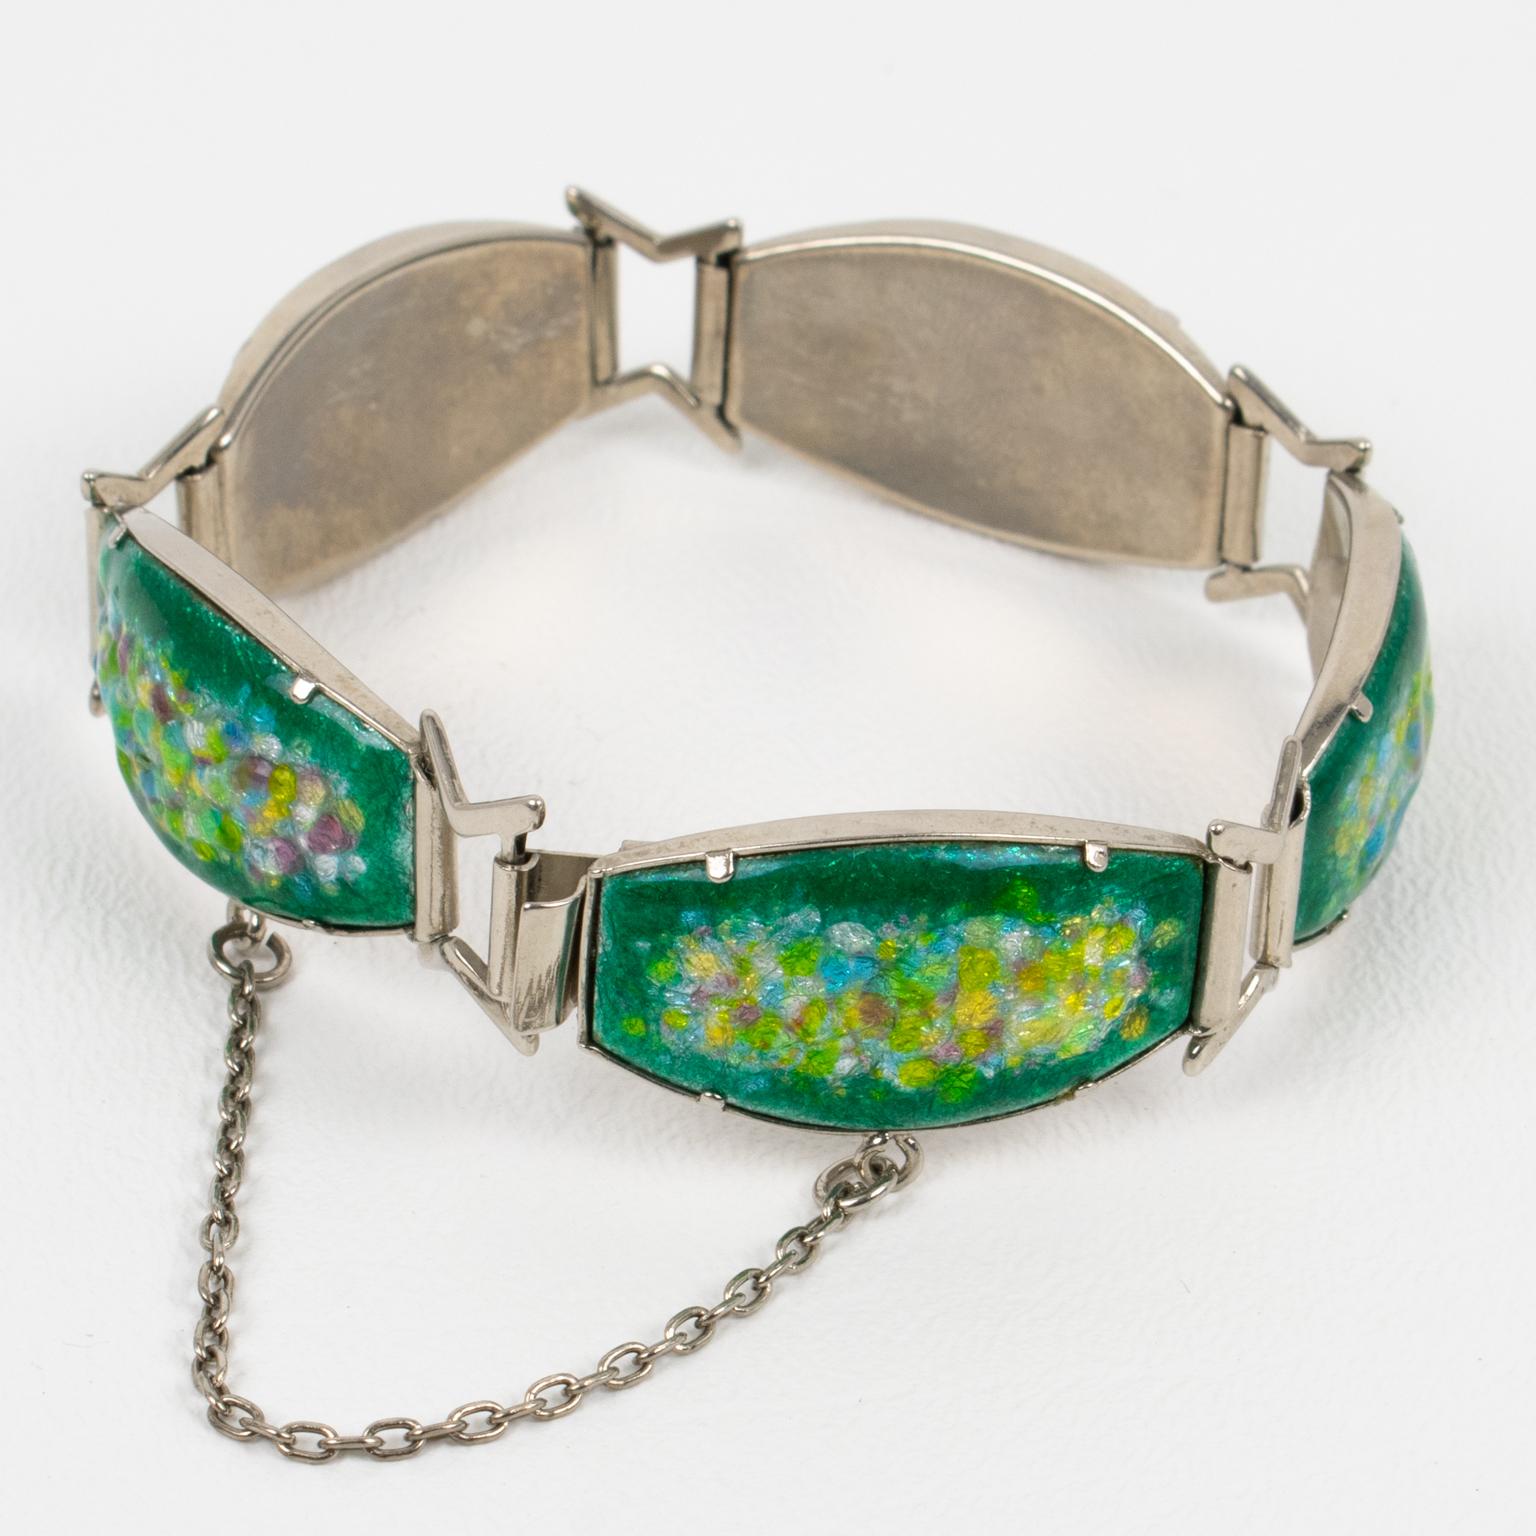 This link bracelet is a romantic piece featuring enamel and pate de verre. It was made in Limoges, France during the 1960s. The bangle boasts a chromed plated geometric framing topped with enameled domed ovoid copper elements. This popular 1950s and